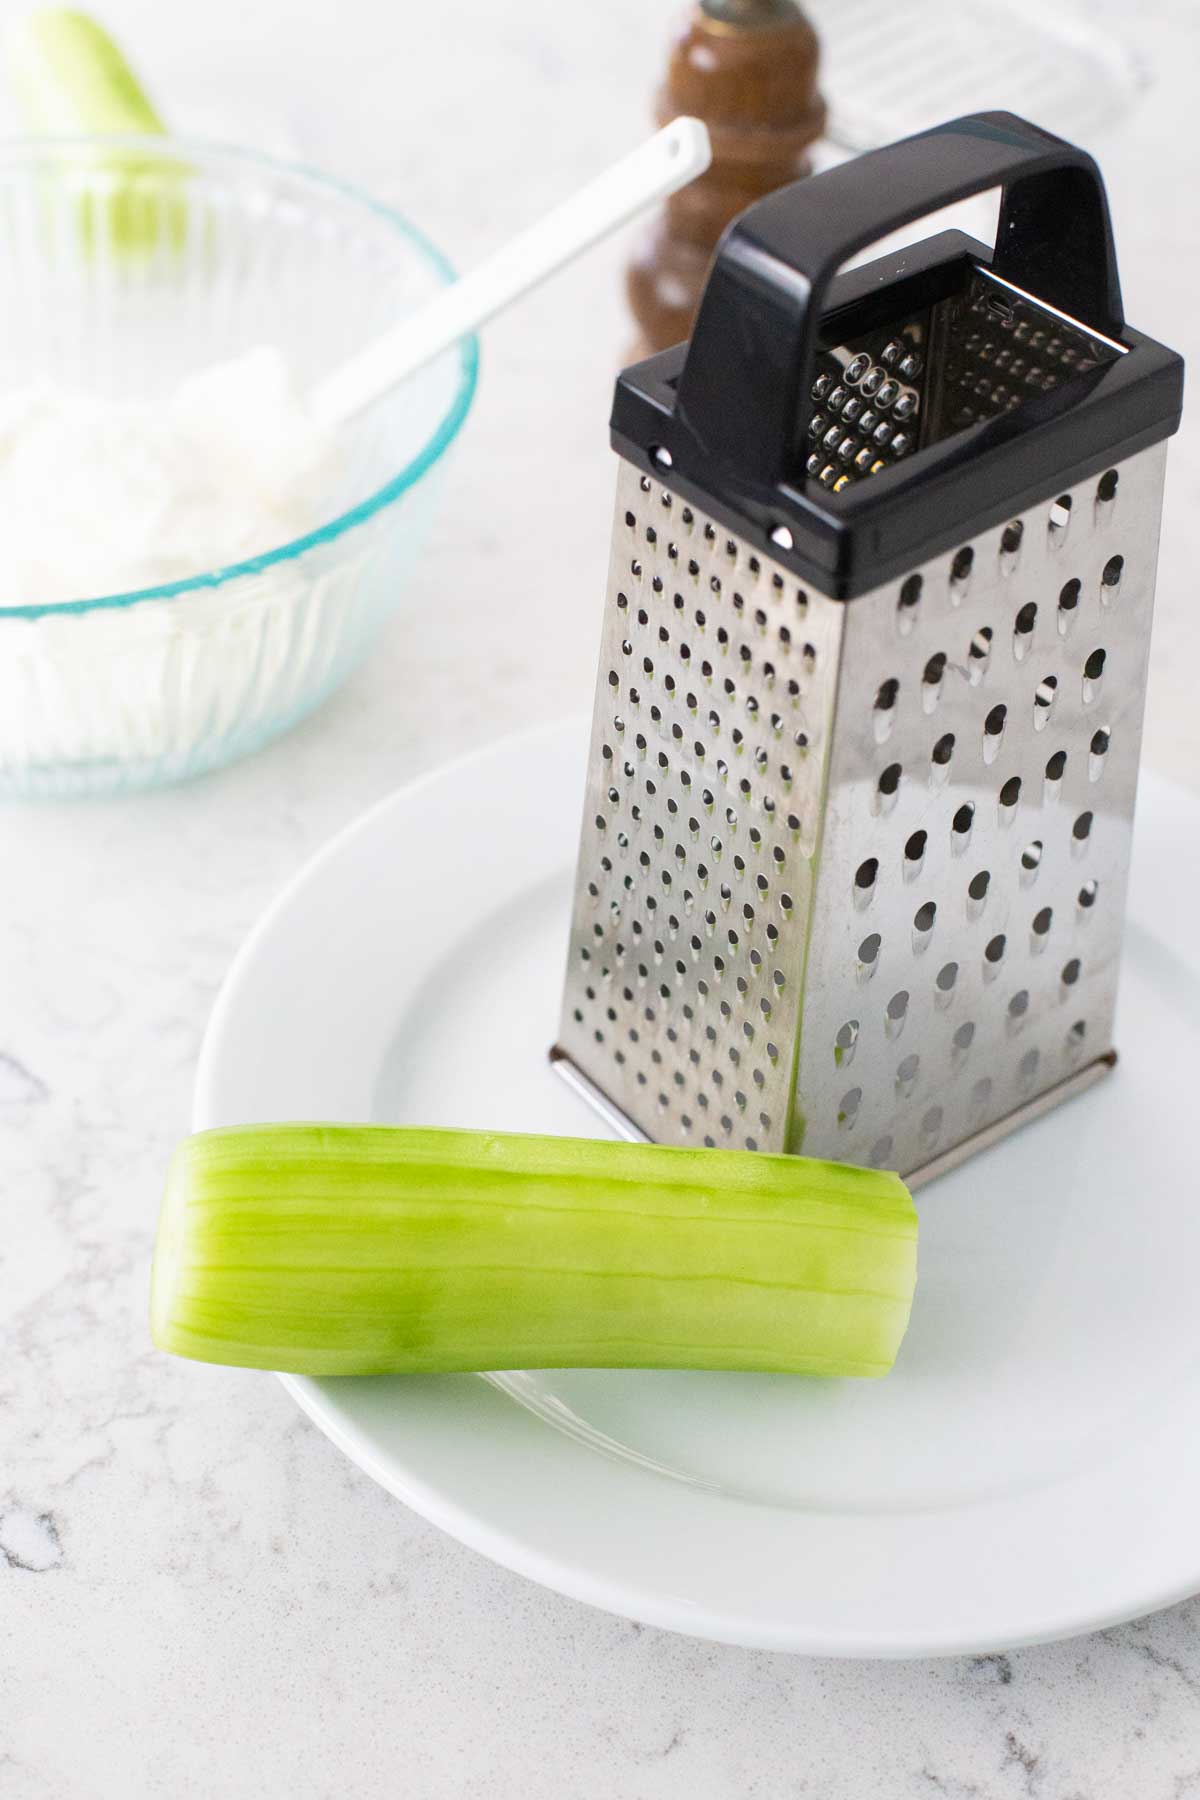 A fresh cucumber has been peeled and sits next to a box grater.